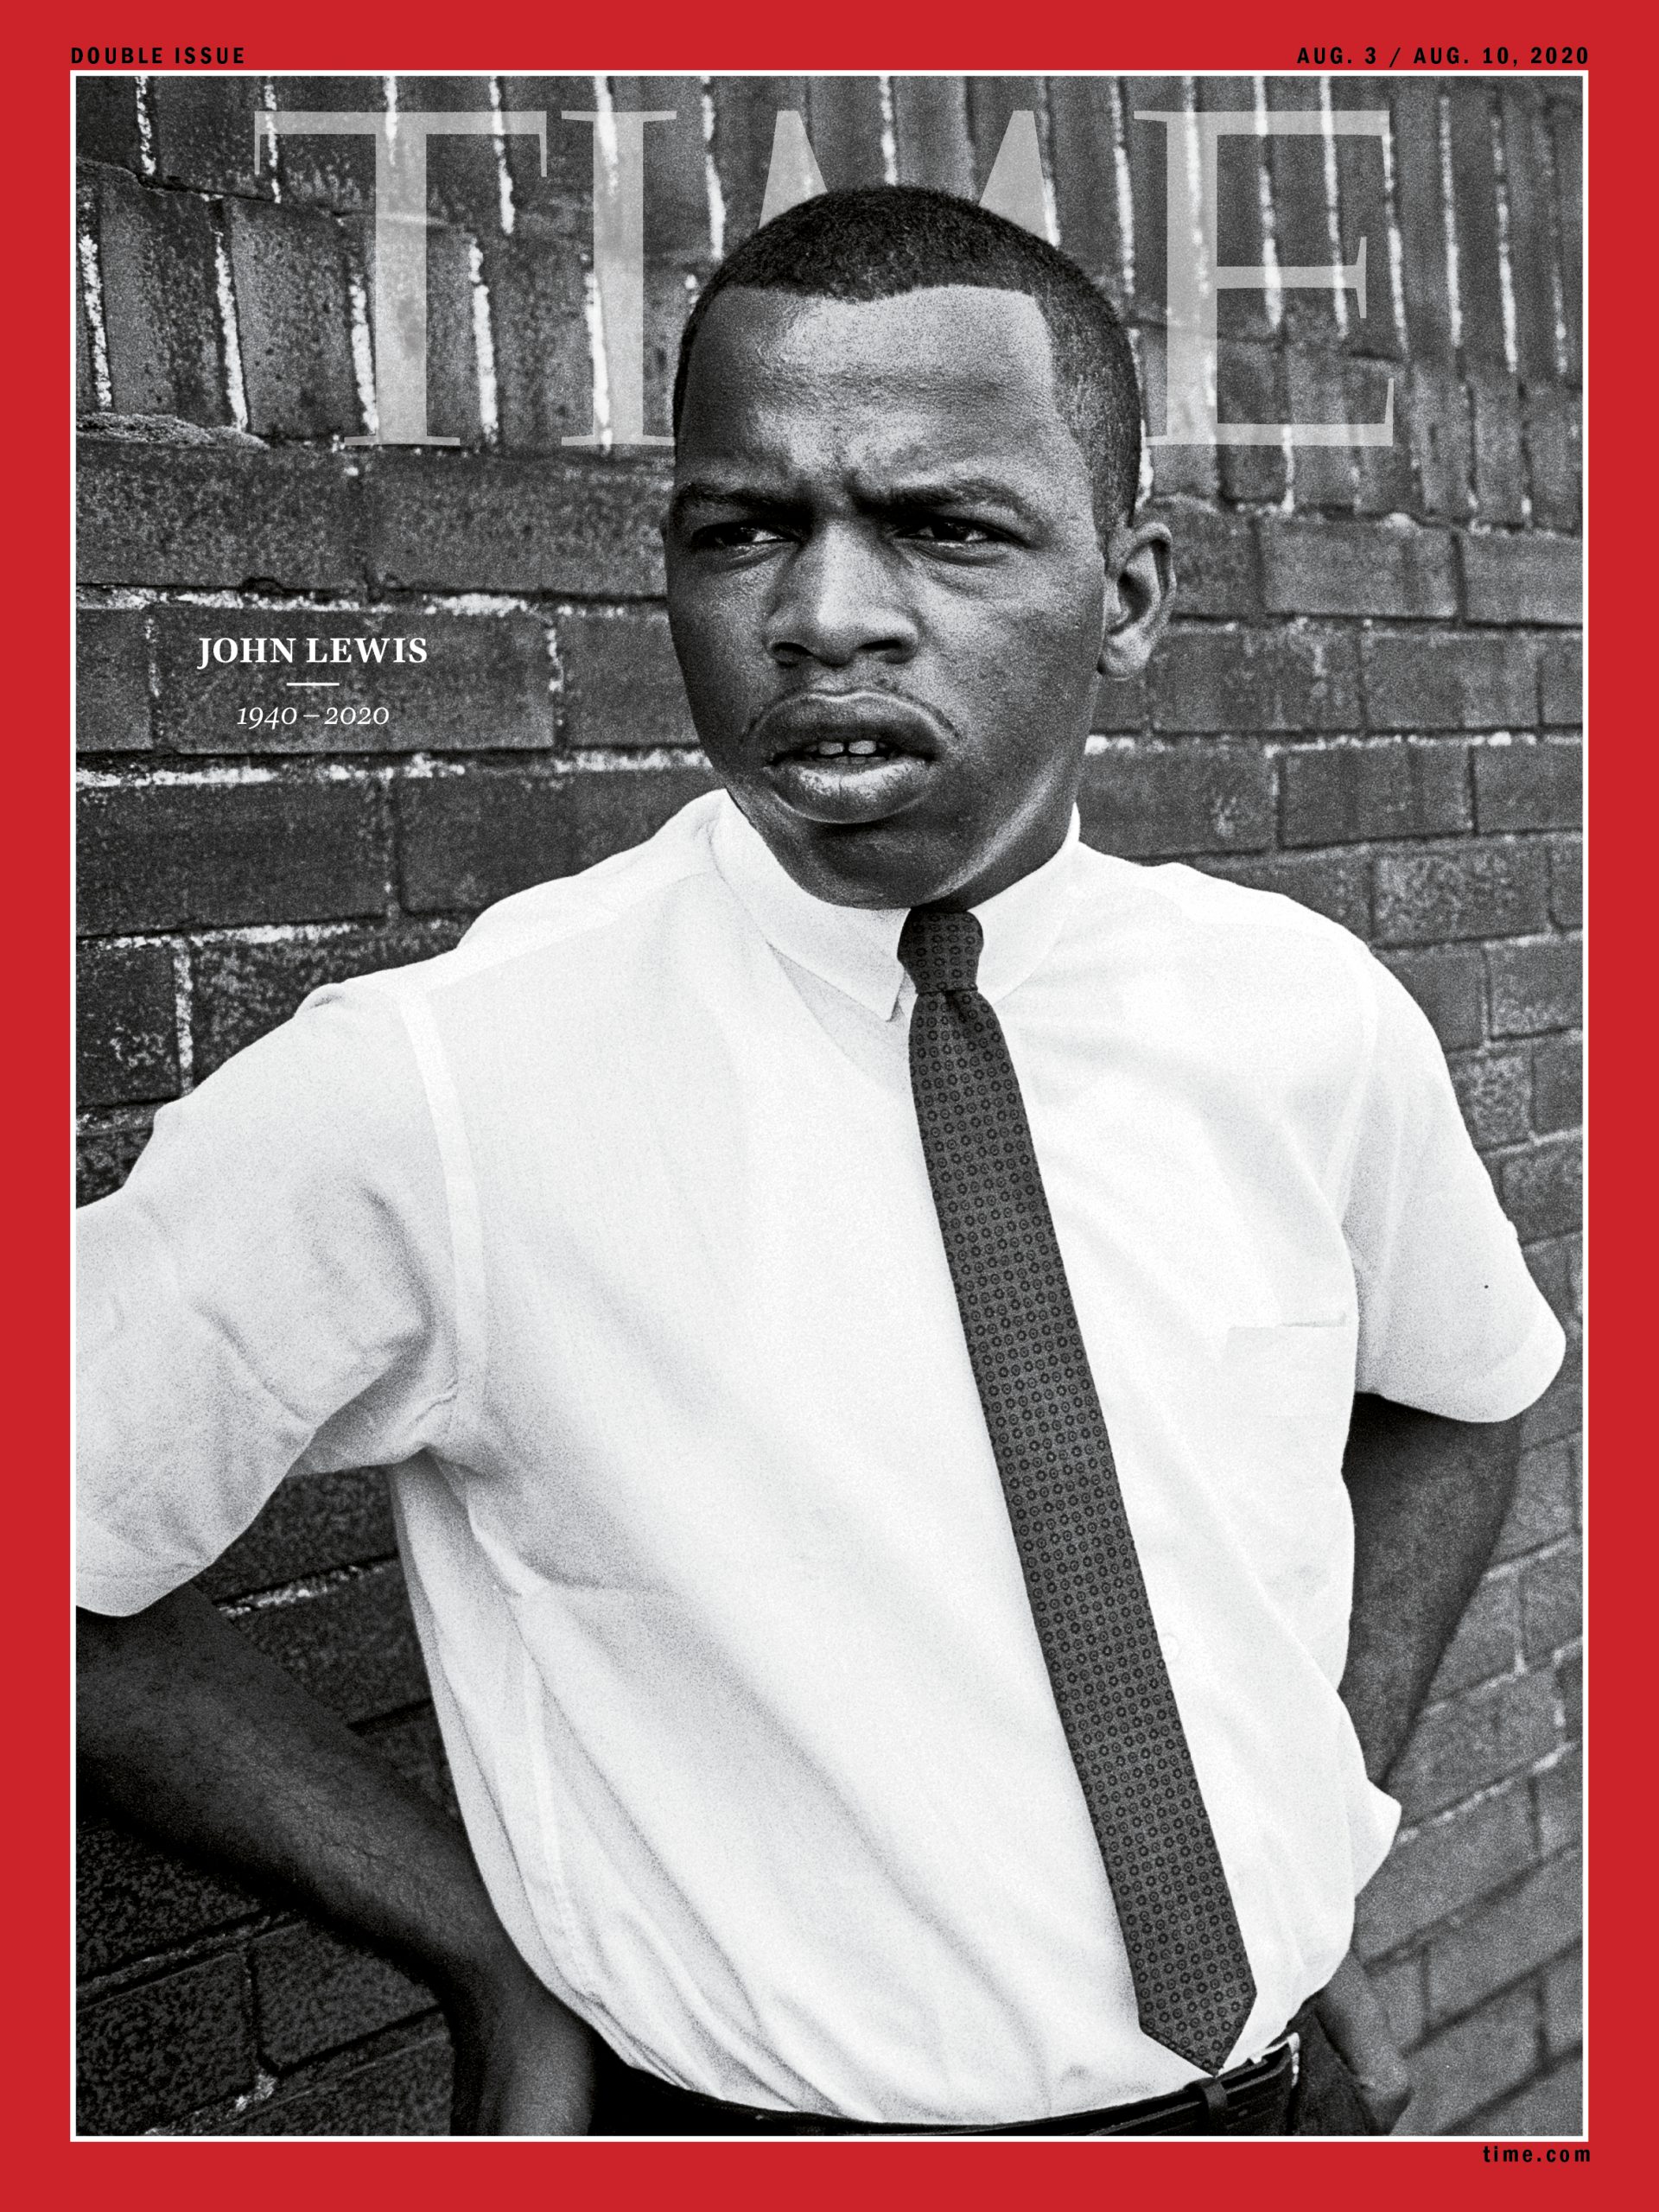 TIME COVER Final.John .Lewis .Cover3  Scaled 